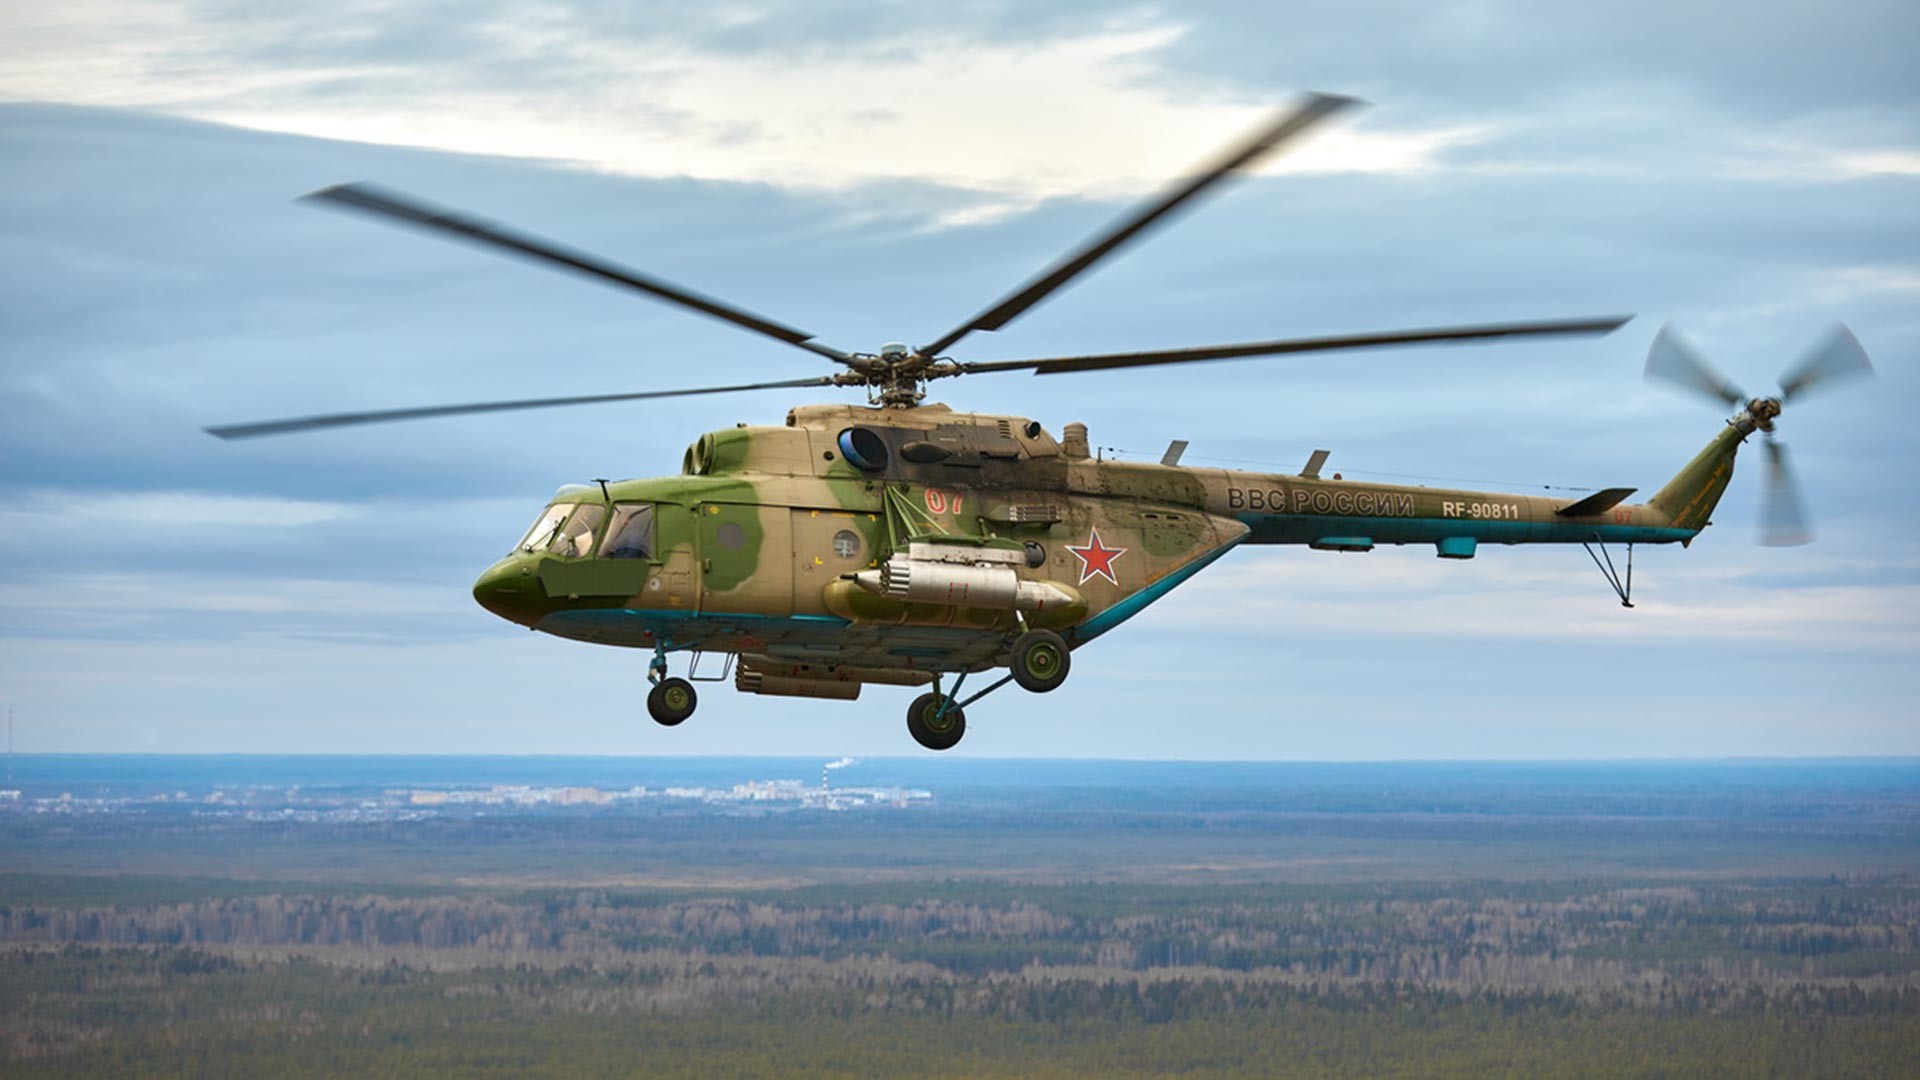 The Mi-8 helicopter of the Leningrad Association air force and air defense during one of the stages of the competition 